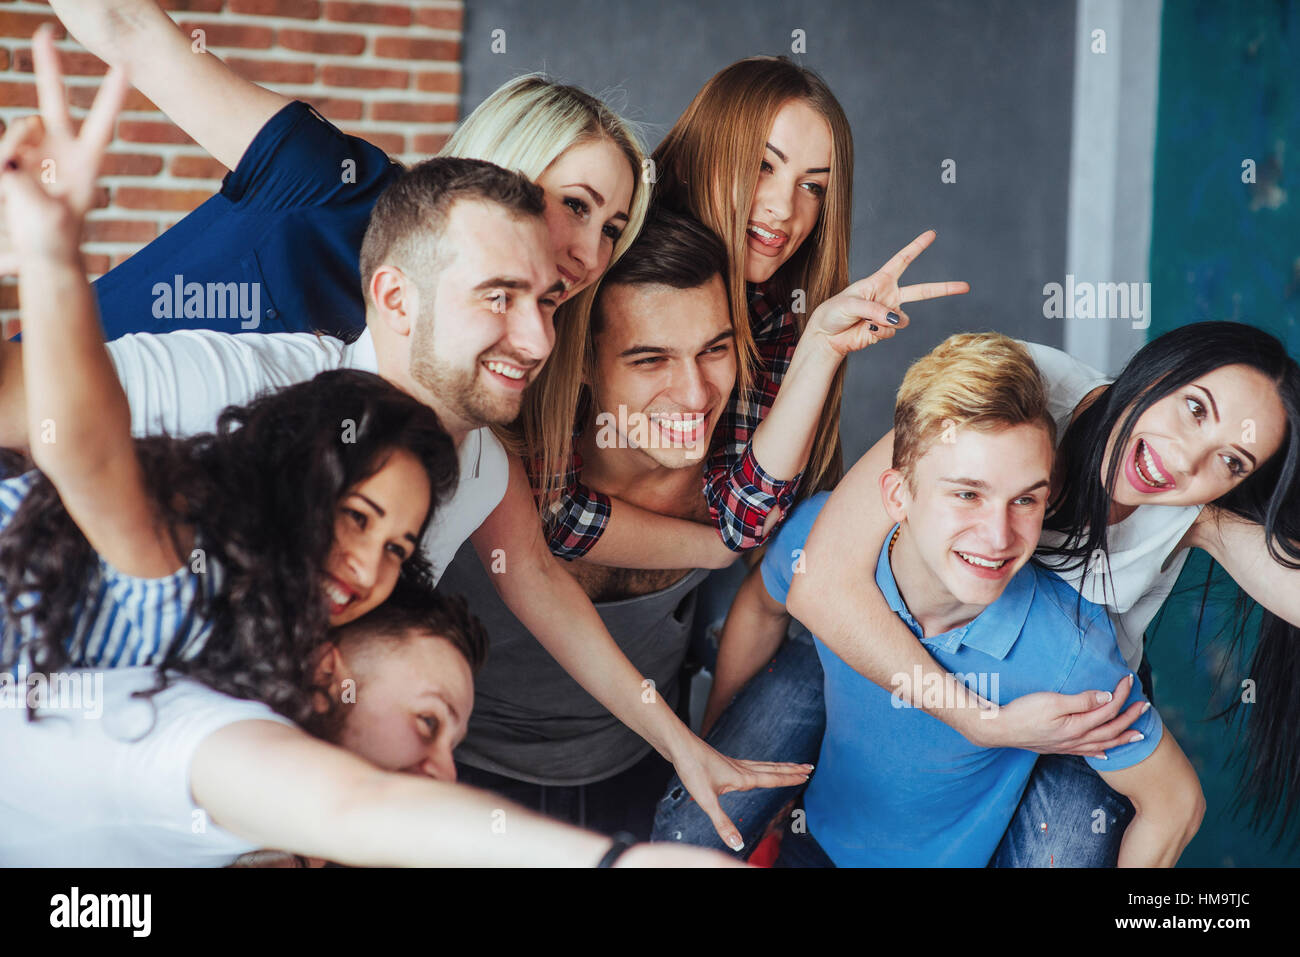 Group Beautiful Young People Doing Selfie In A Cafe Best Friends Girls And Boys Together Having Fun Posing Emotional Lifestyle Concept Stock Photo Alamy